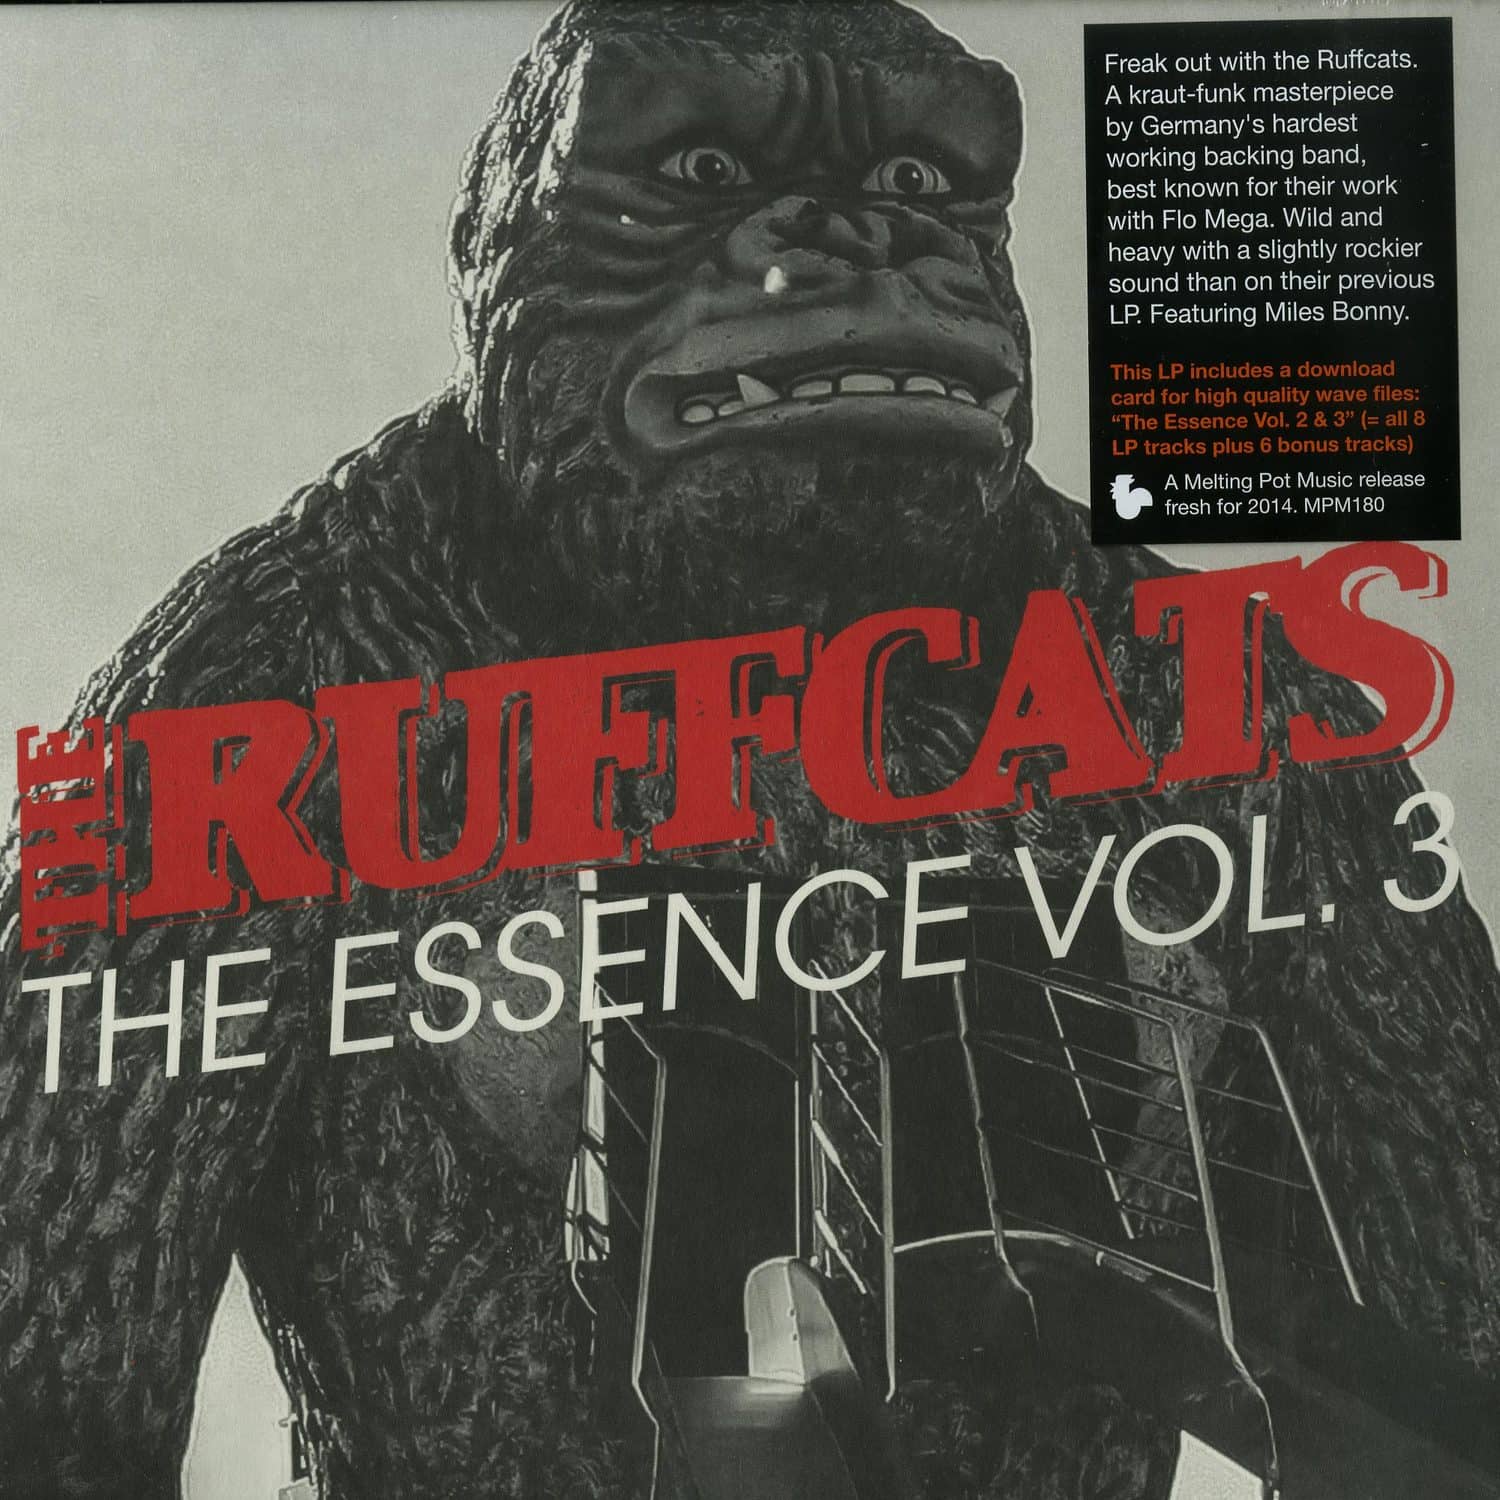 The Rufcats - THE ESSENCE VOL.3 